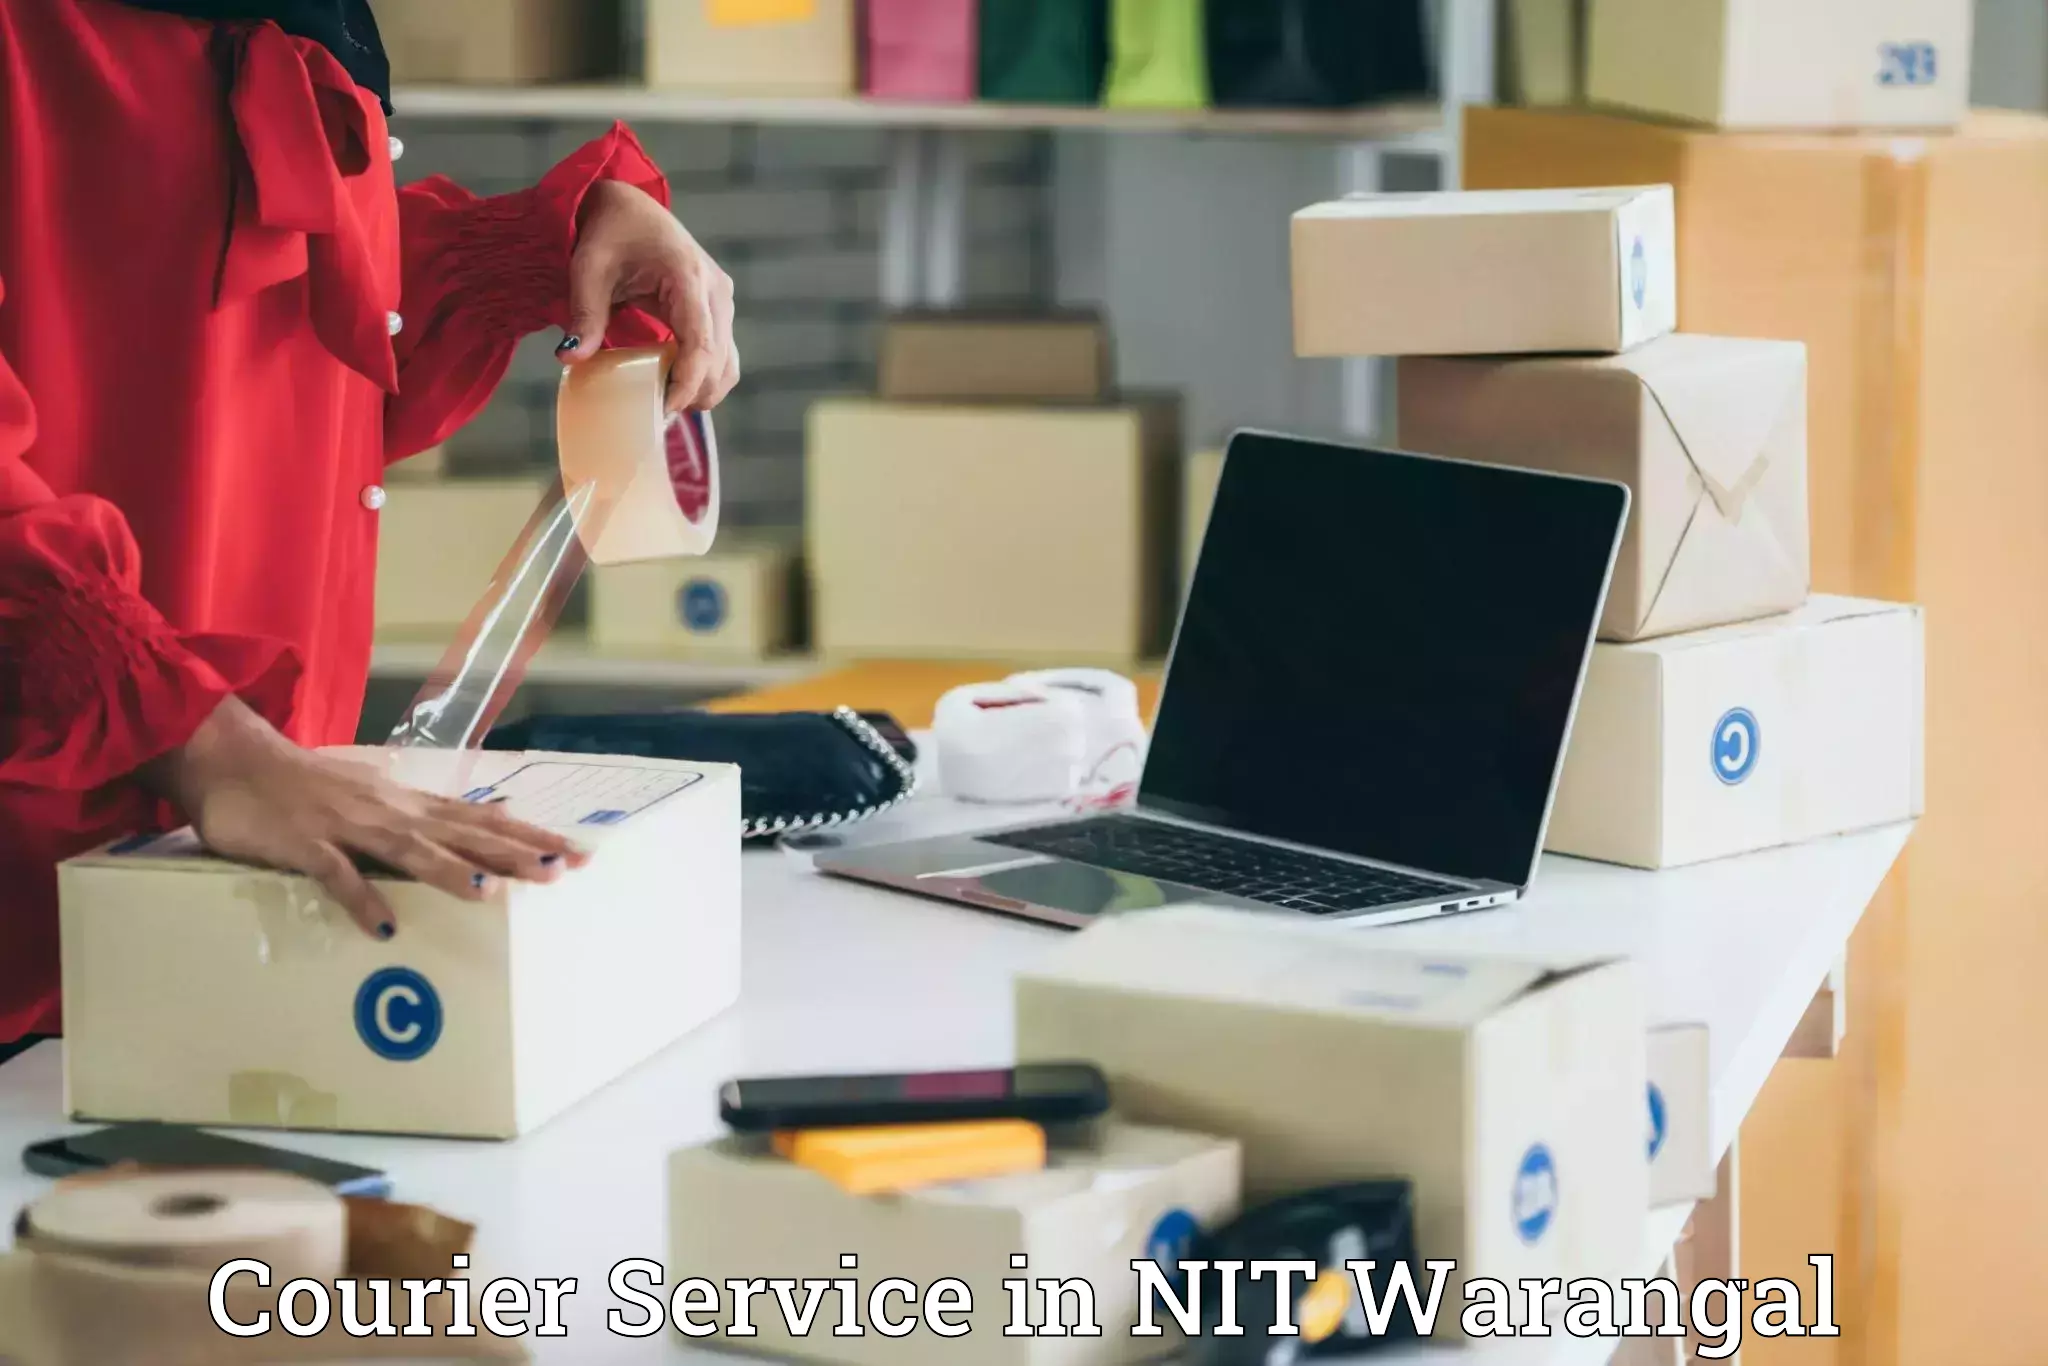 Dynamic courier operations in NIT Warangal